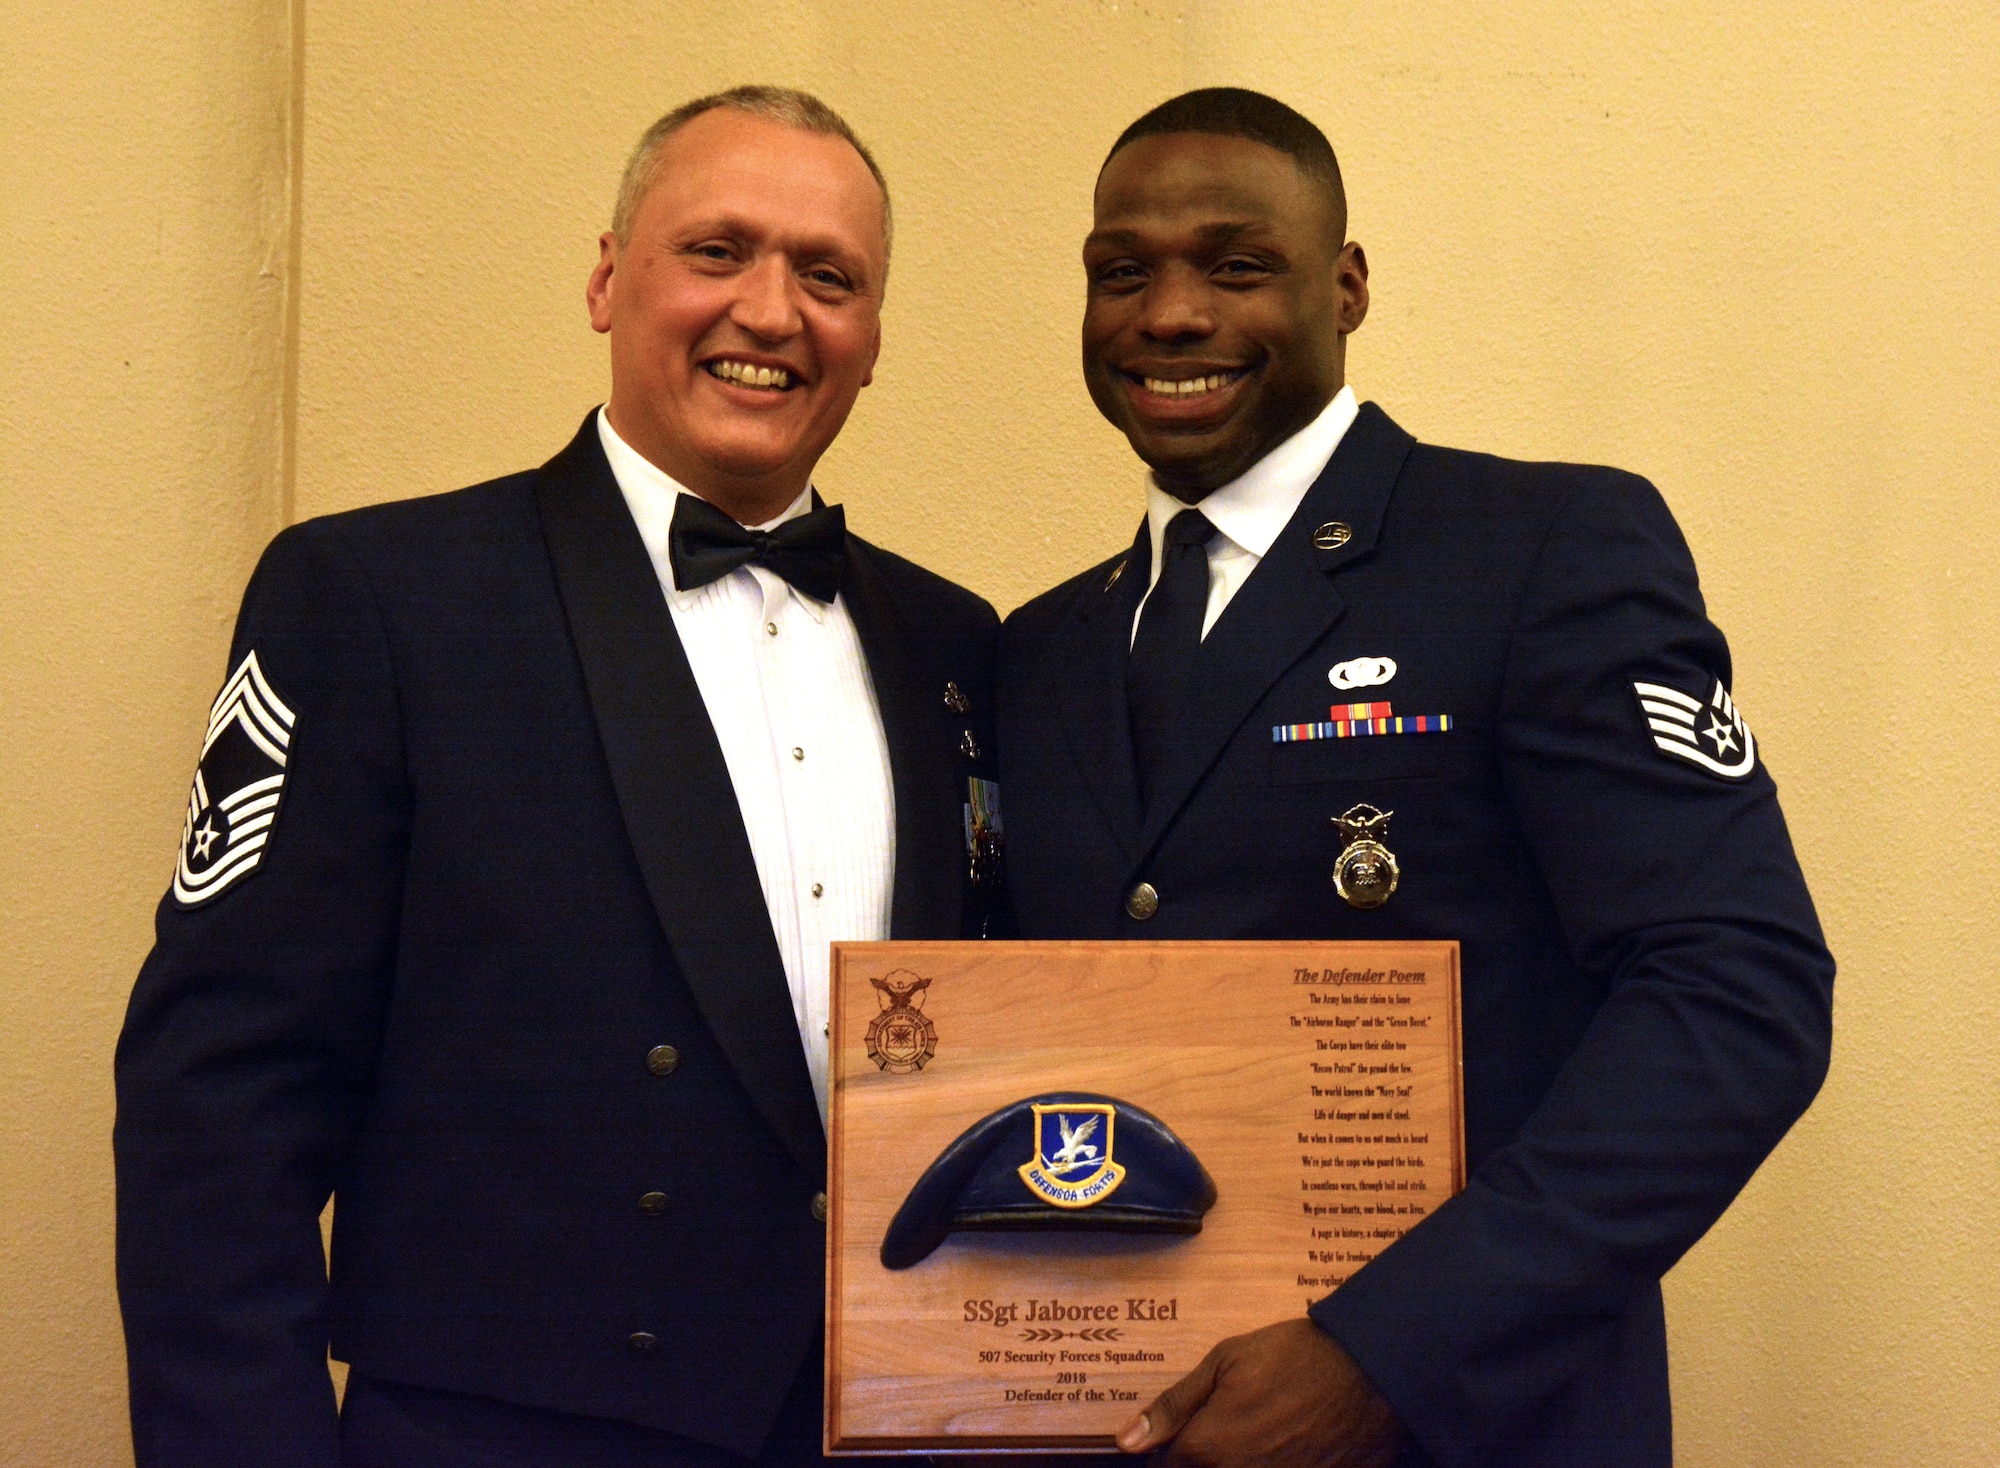 Chief Master Sgt. Nickolas Swainston, 507th Security Forces Squadron, presents the 2018 507th SFS Defender of the Year award for outstanding performance to Staff Sgt. Jaboree Kiel March 2, 2019, in Midwest City, Oklahoma. (U.S. Air Force photo by Maj. Jon Quinlan)